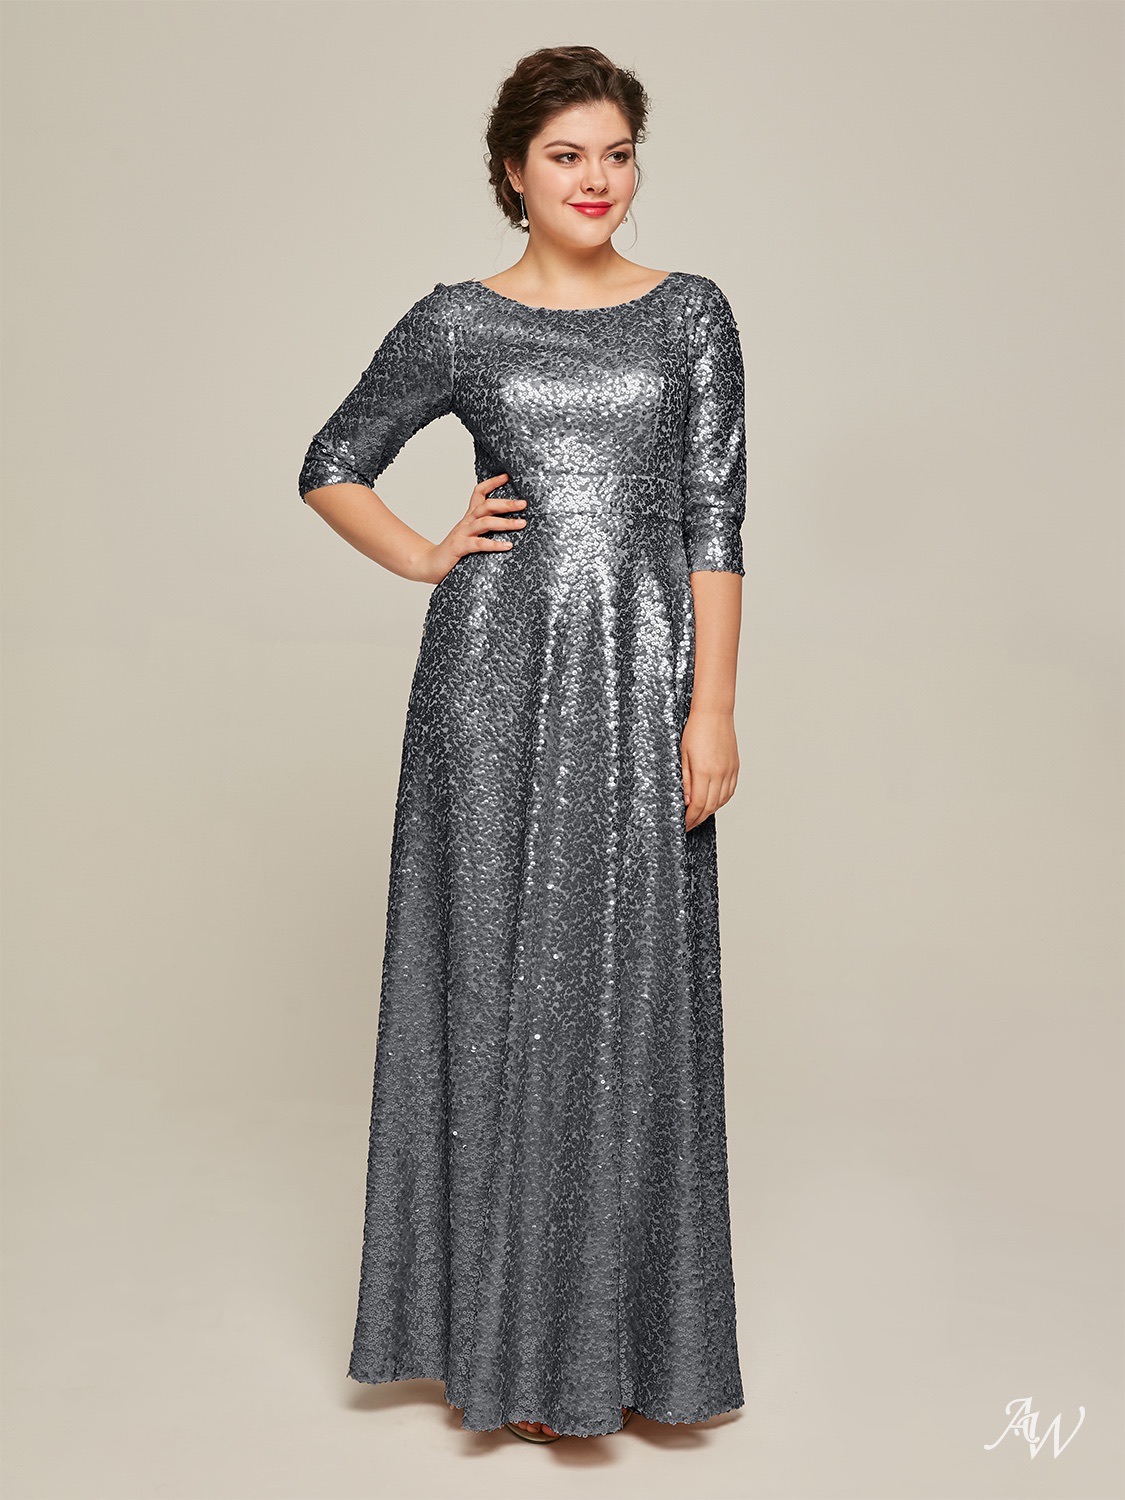 Sparkly Mother of The Bride Dress - AW Bridal1